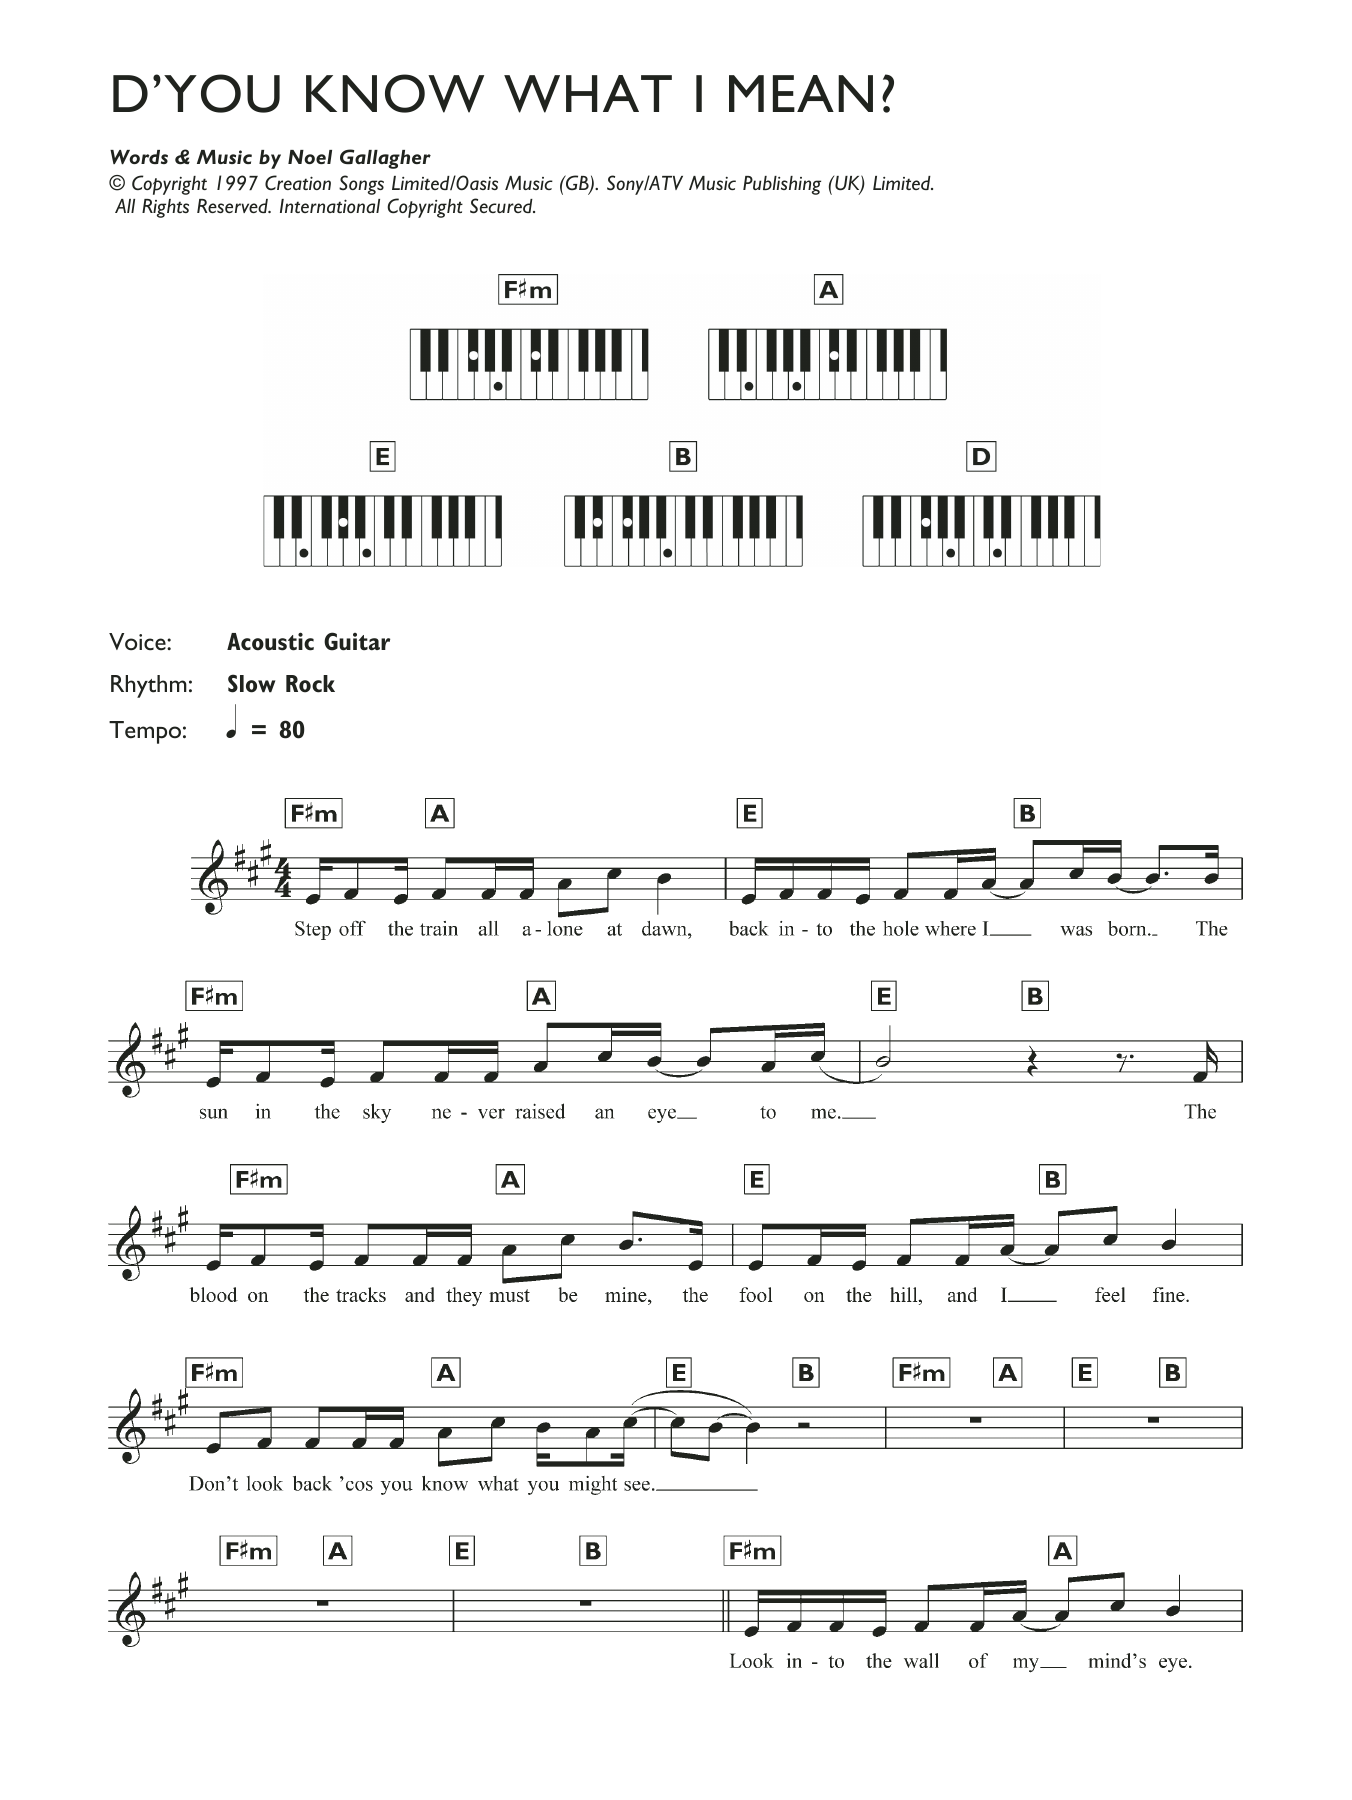 Download Oasis D'You Know What I Mean? Sheet Music